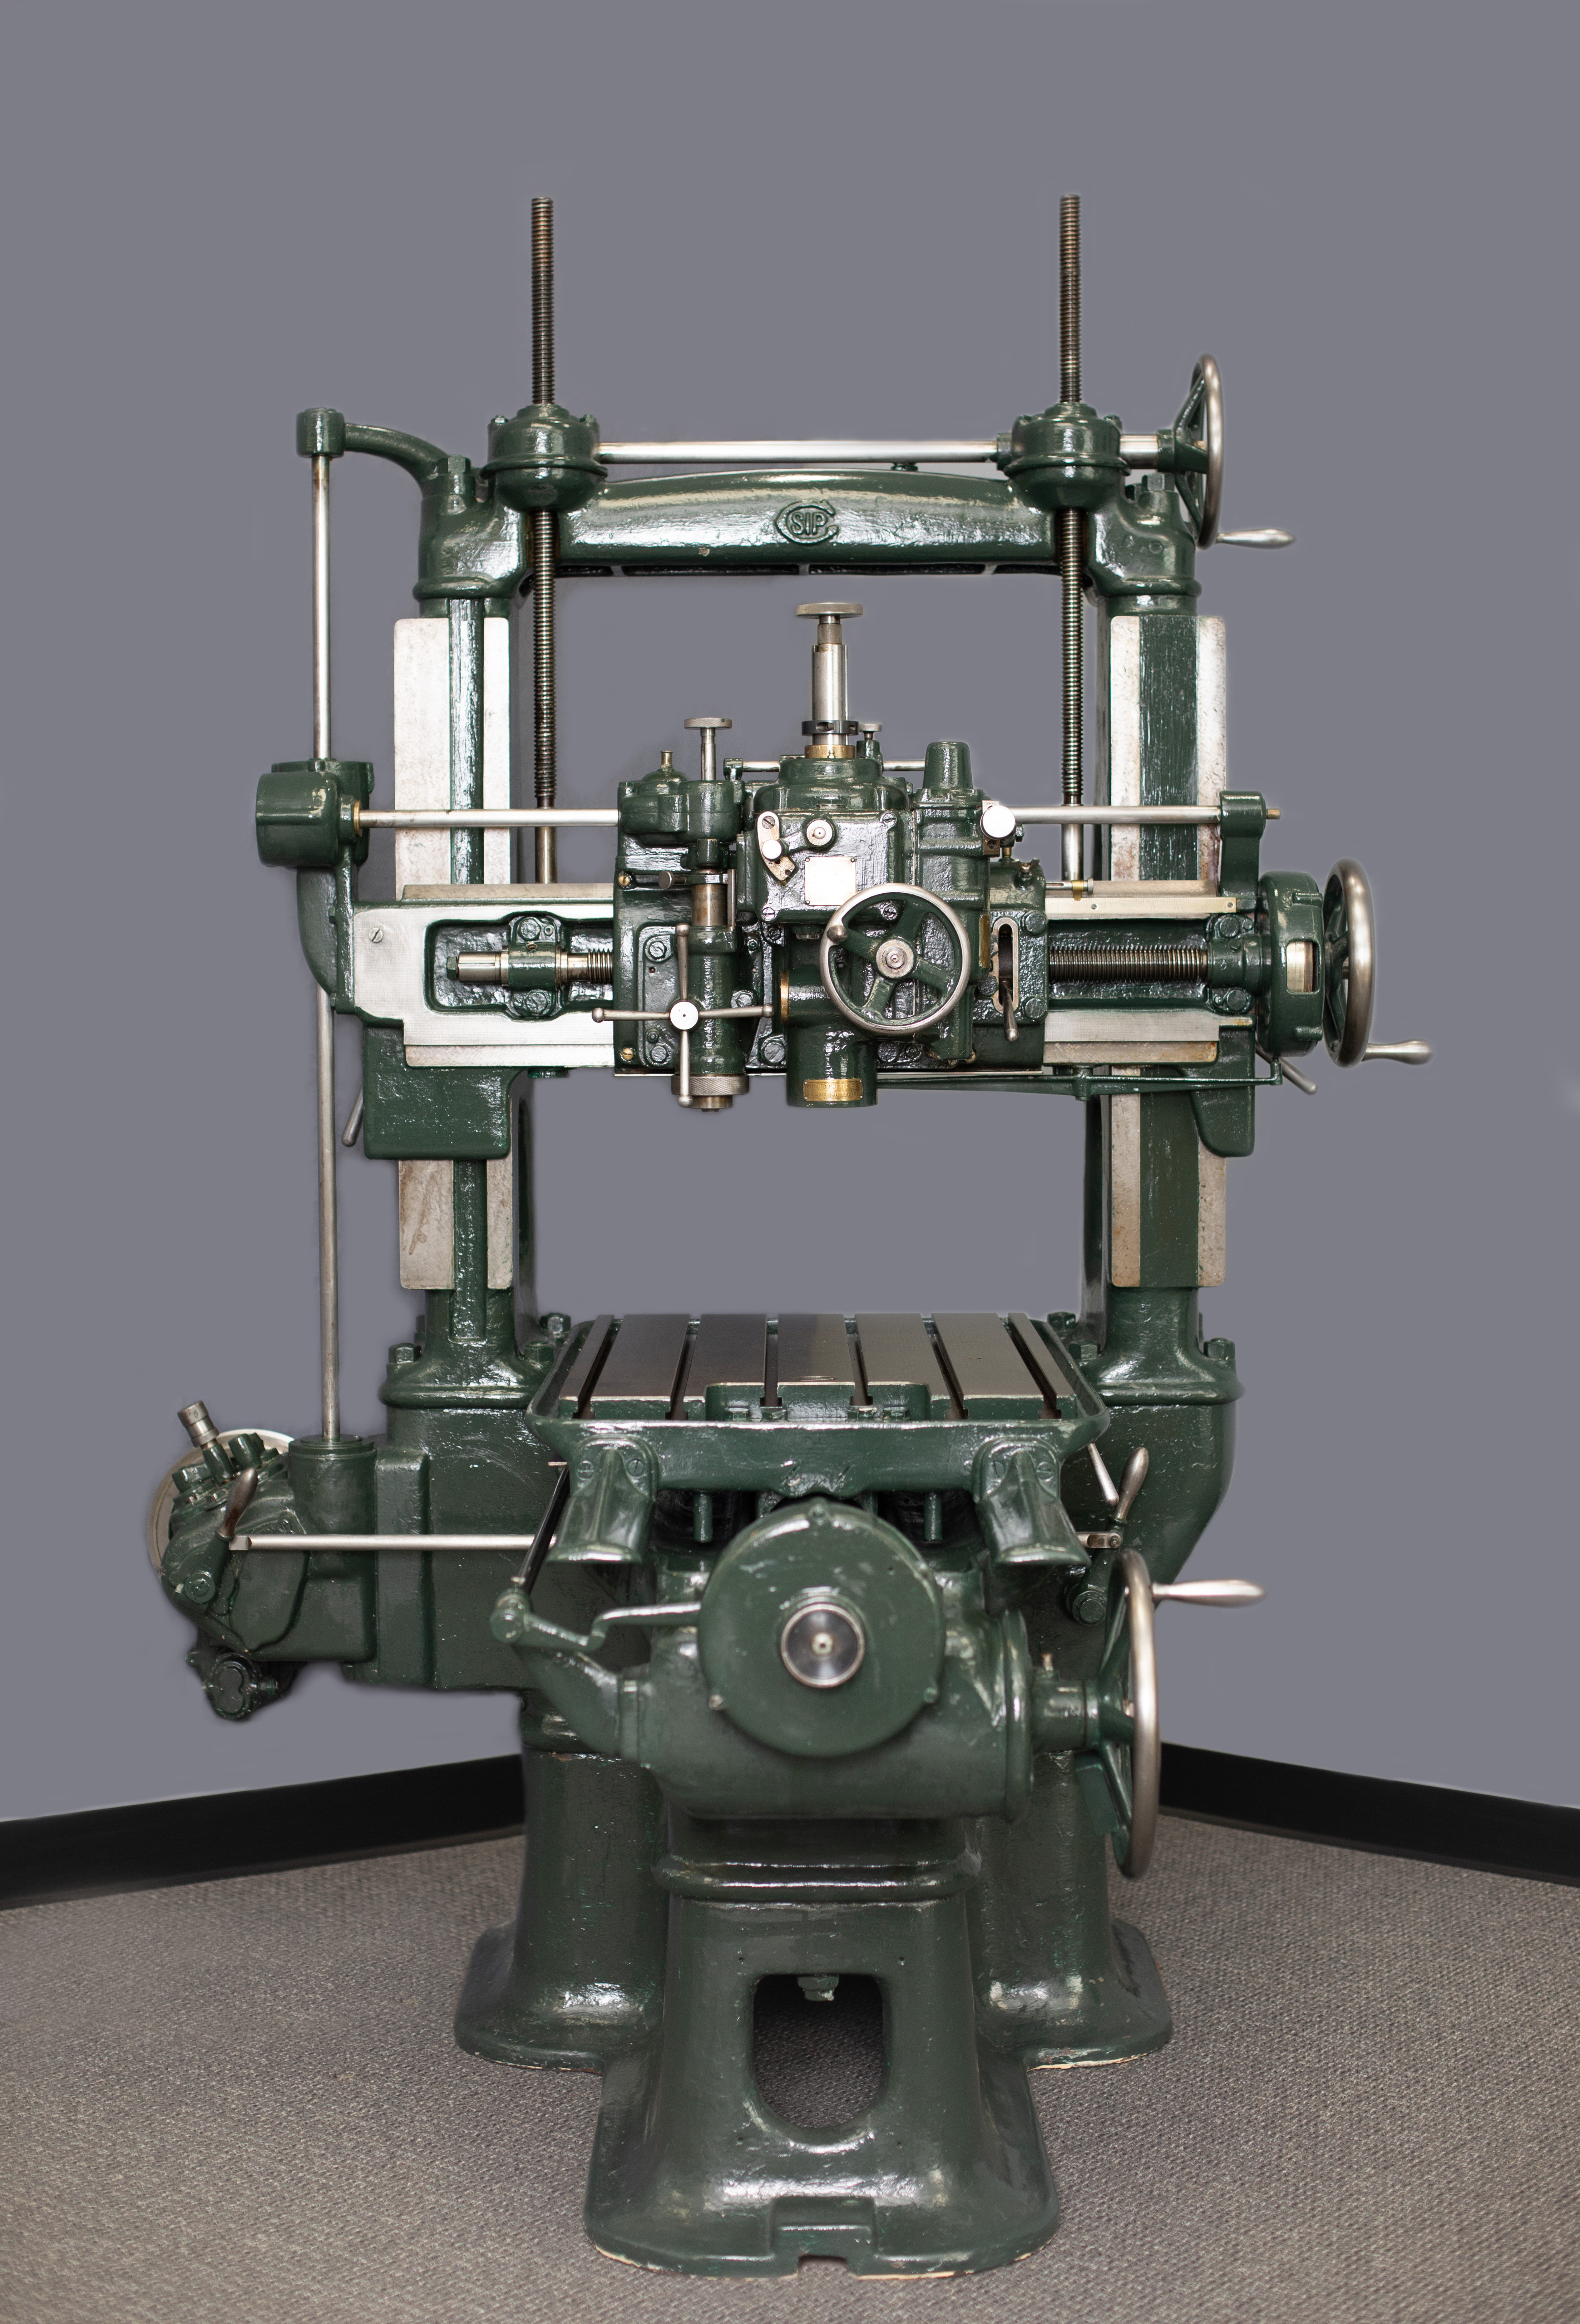 In 1928, a precision optics machine arrived on U.S. shores on a ship from Europe.